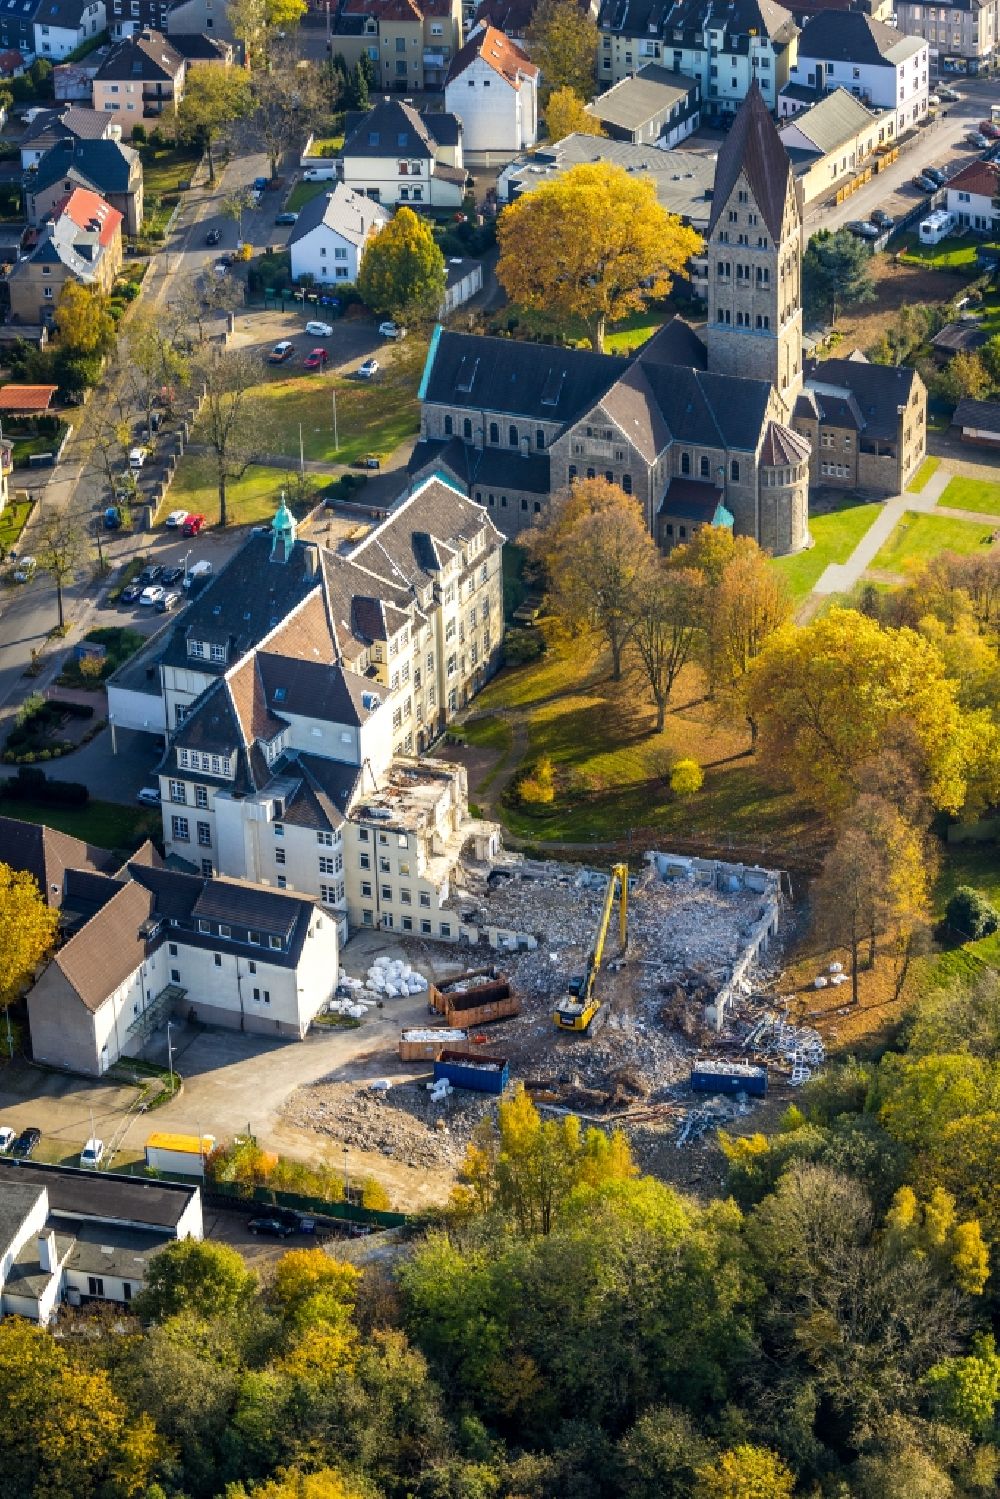 Bochum from the bird's eye view: Demolition and disposal work on the remains of the ruins of Krankenhauses Venenzentrum Maria-Hilf-Krankenhaus on Hiltroper Landwehr overlooking the church building of the Kirche St. Elisabeth in the district Hiltrop in Bochum at Ruhrgebiet in the state North Rhine-Westphalia, Germany